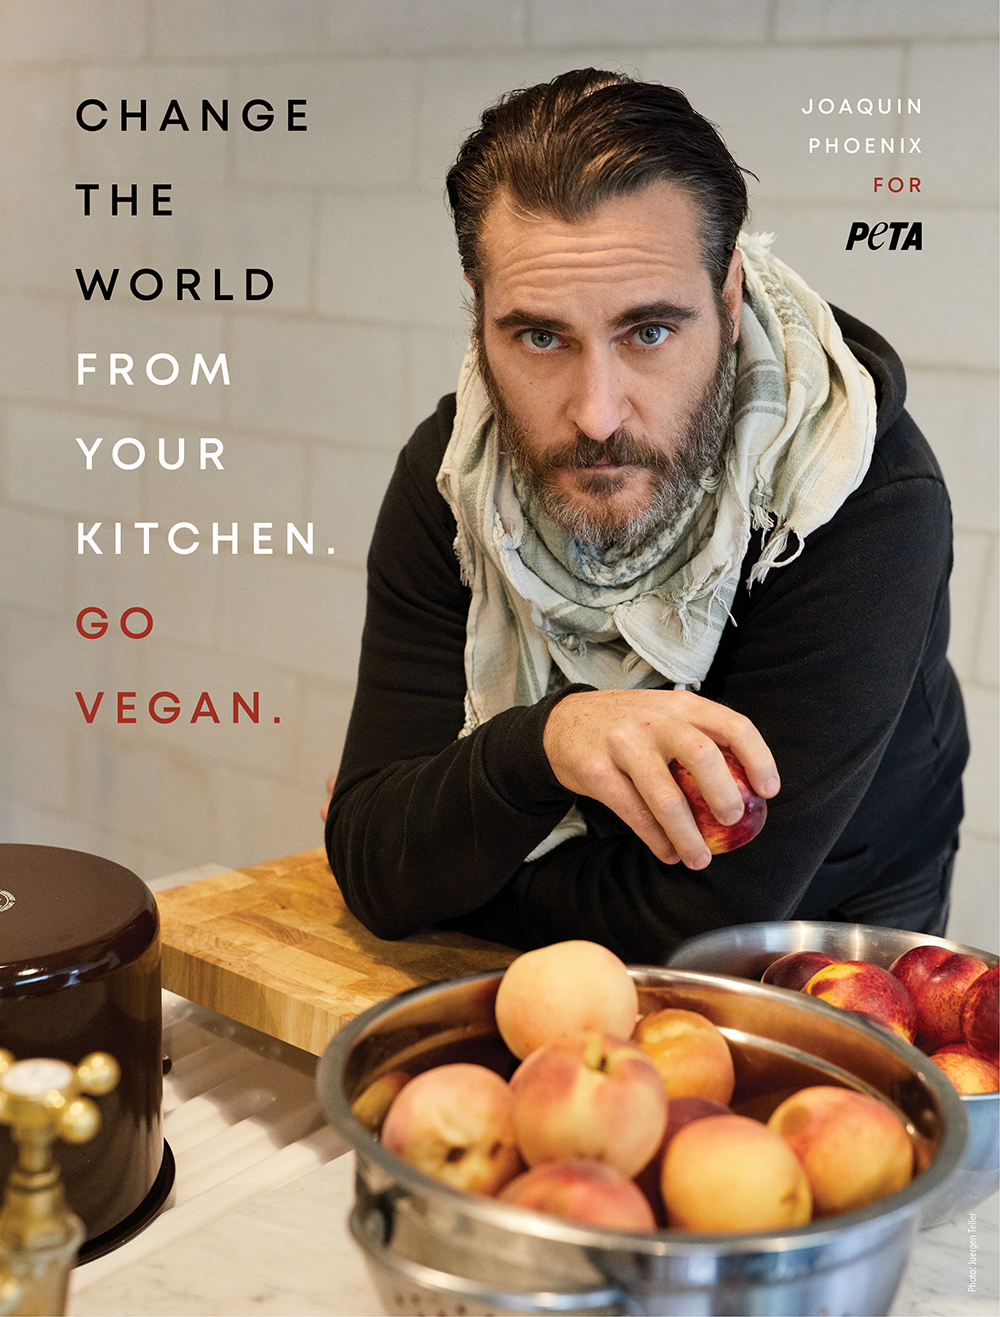 Joaquin Phoenix Wants You to Change the World From Your Kitchen